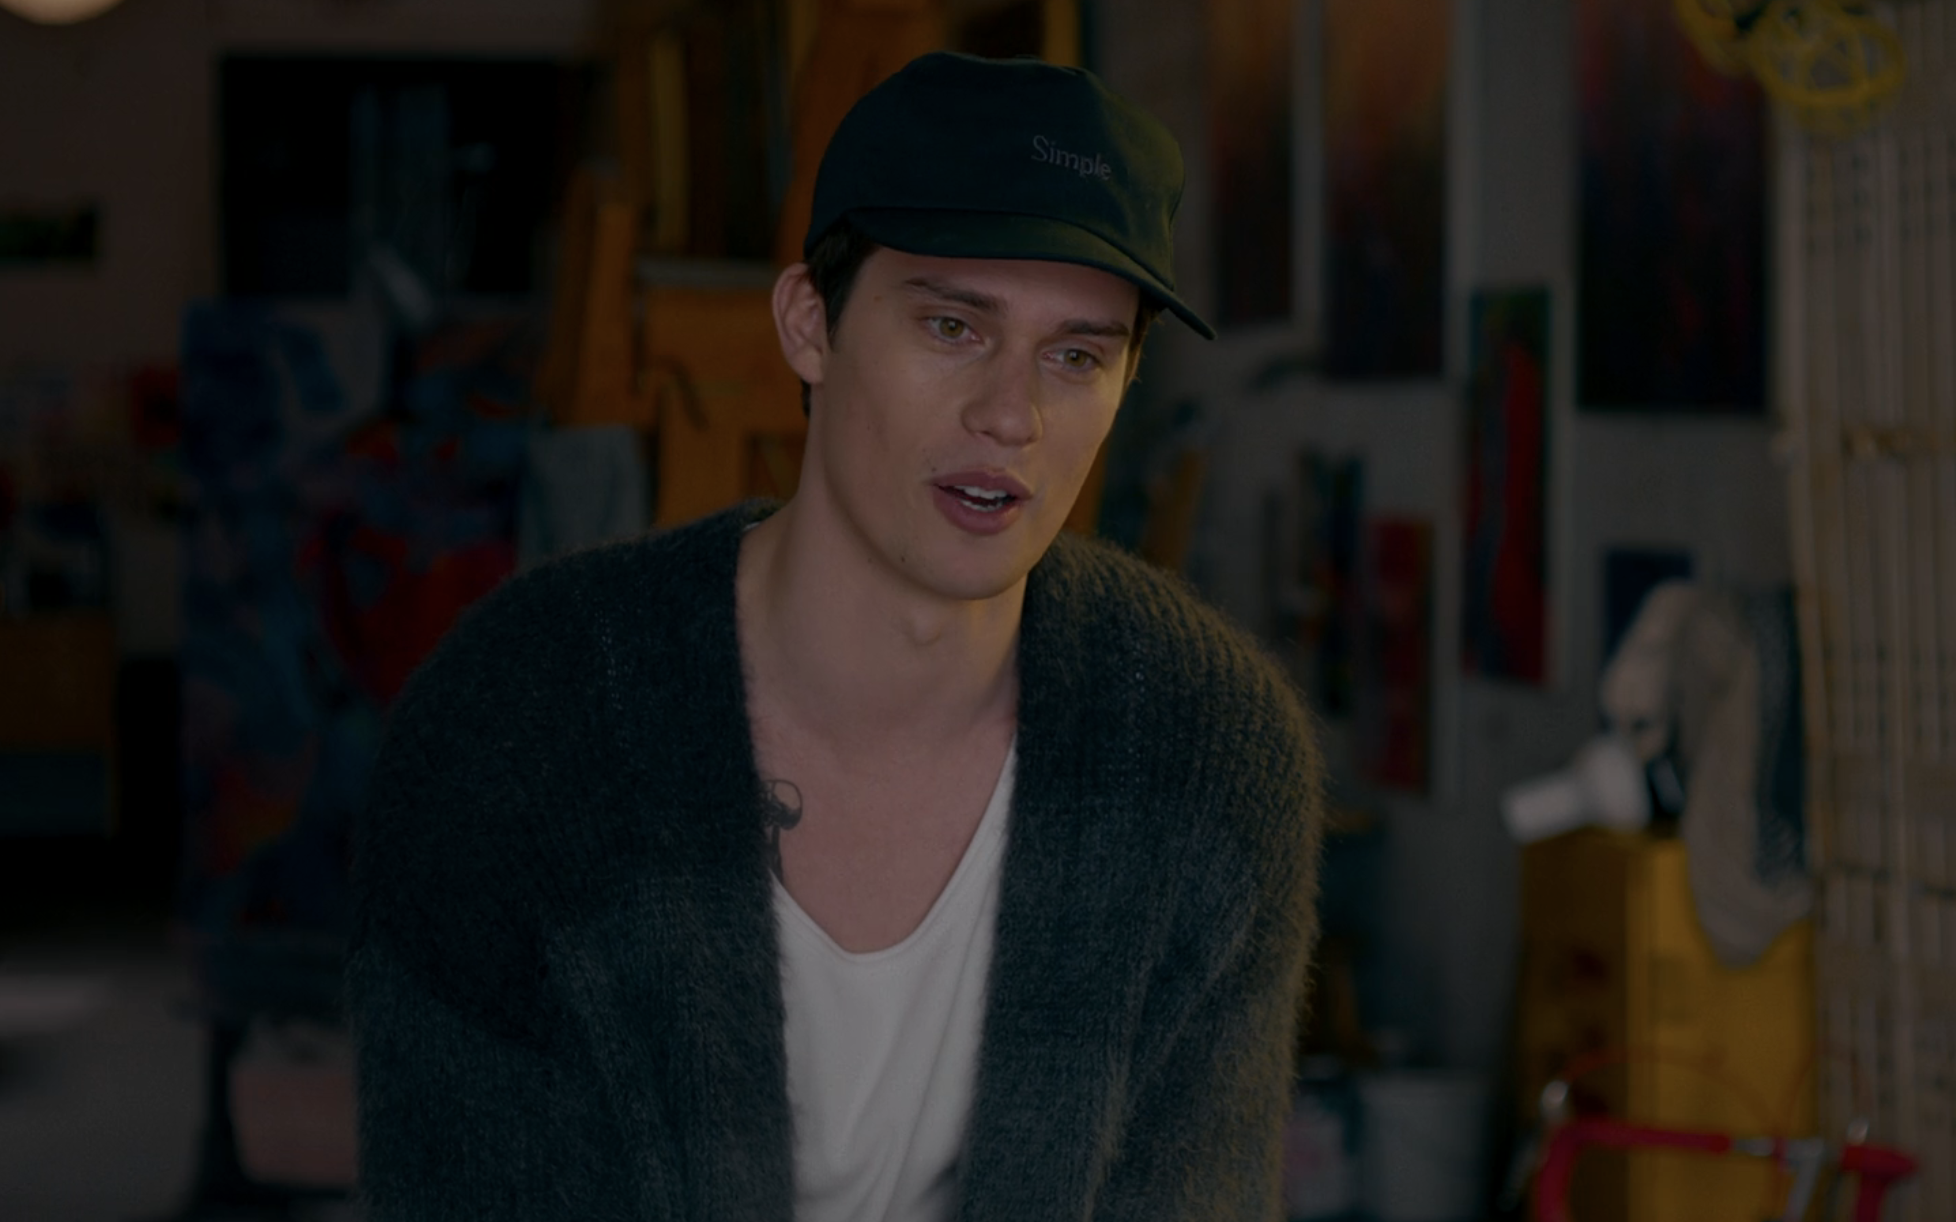 A man wearing a cap and cardigan speaks in a room with art supplies; emotional scene from a TV show